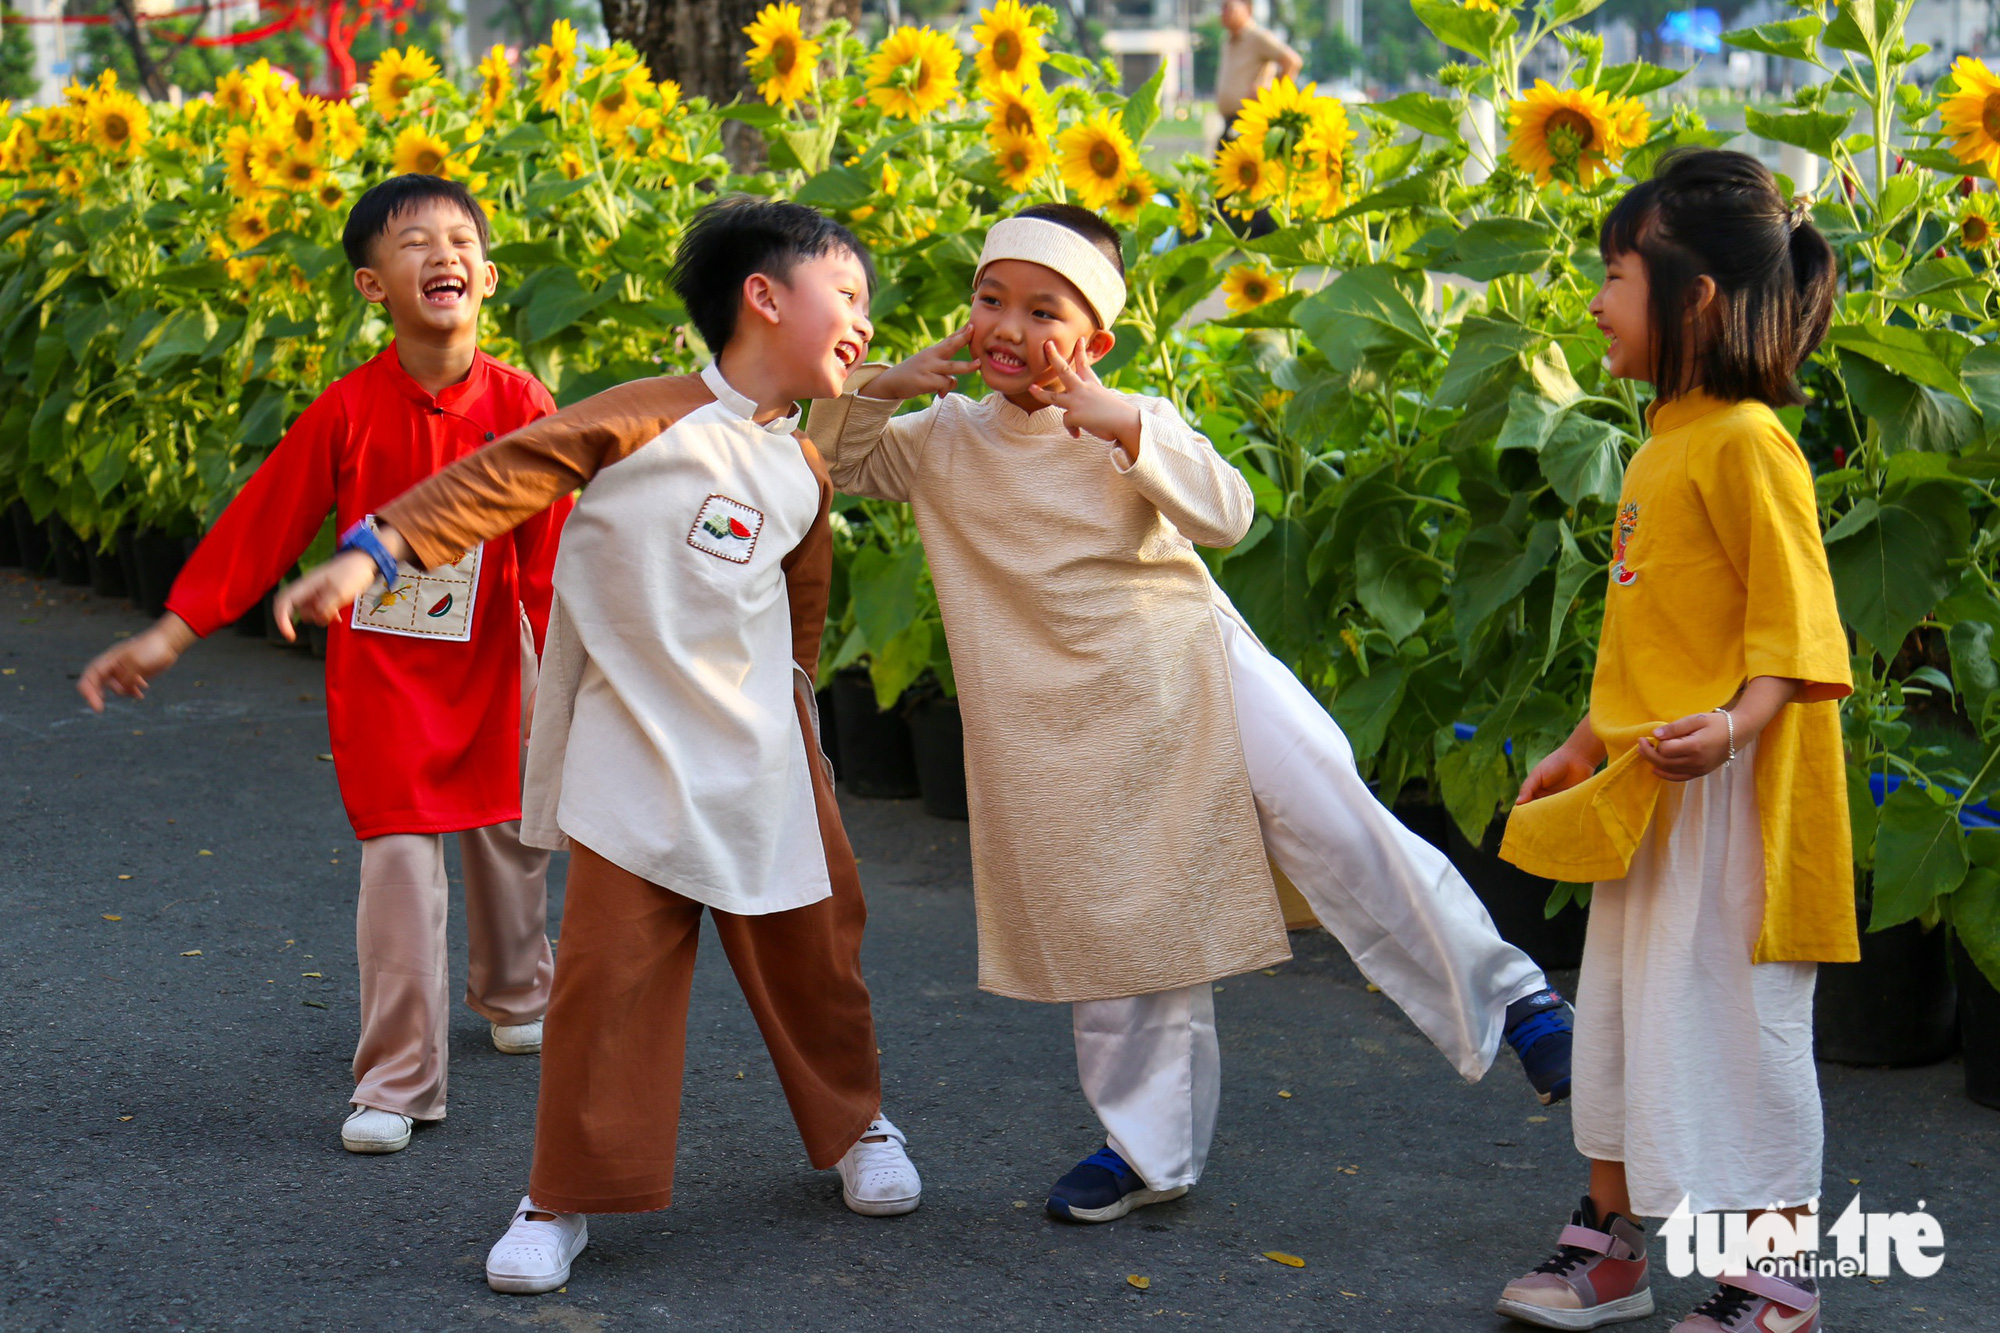 Tom (in creamy ao dai, a Vietnamese traditional costume) and his friends are taken to the flower festival by their parents so that they can have Tet memories in their childhood. Photo: Phuong Quyen / Tuoi Tre